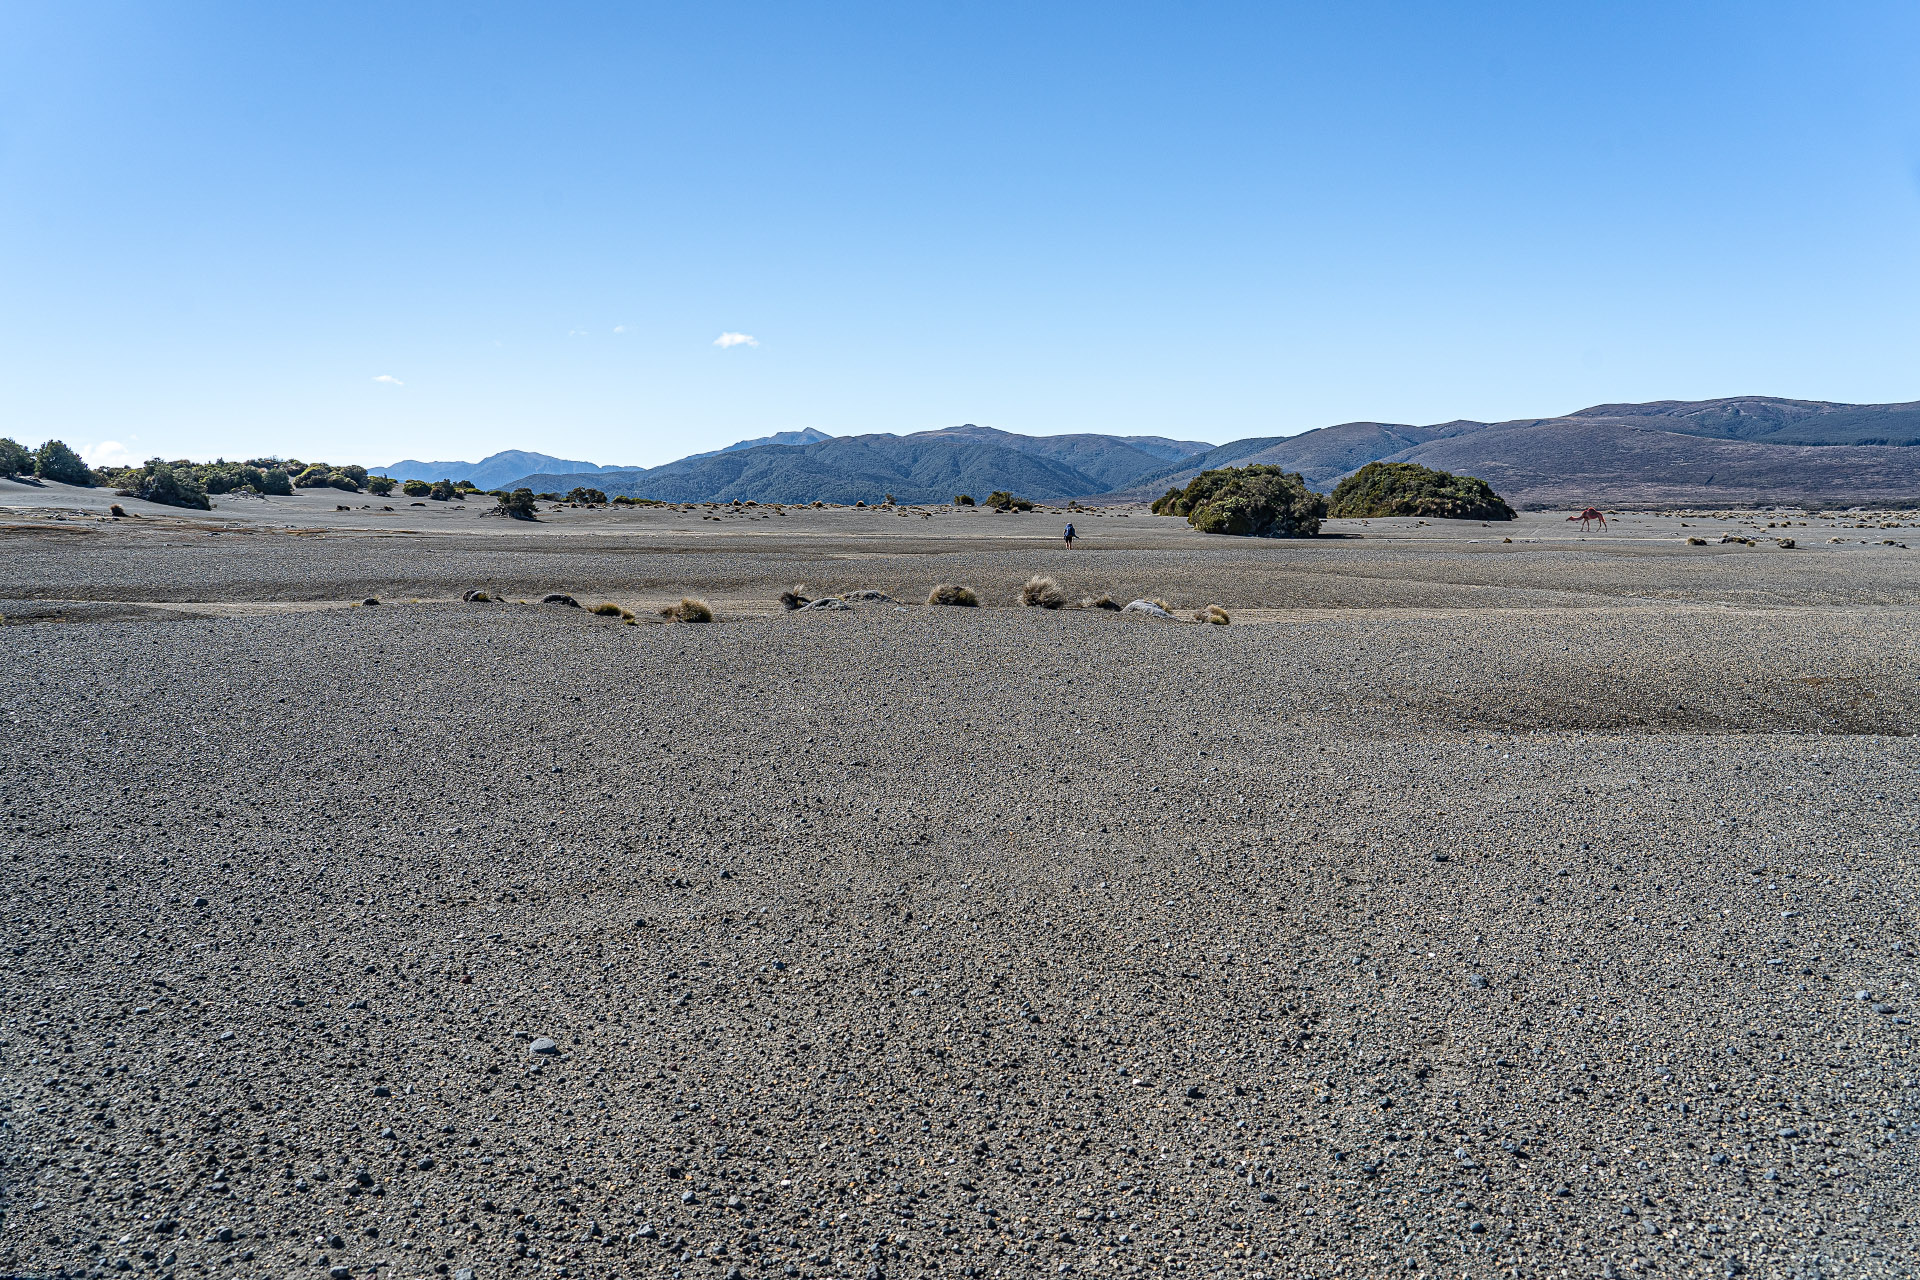 The sandy Rangipo desert that is actually a ring plain of Mt Ruapehu